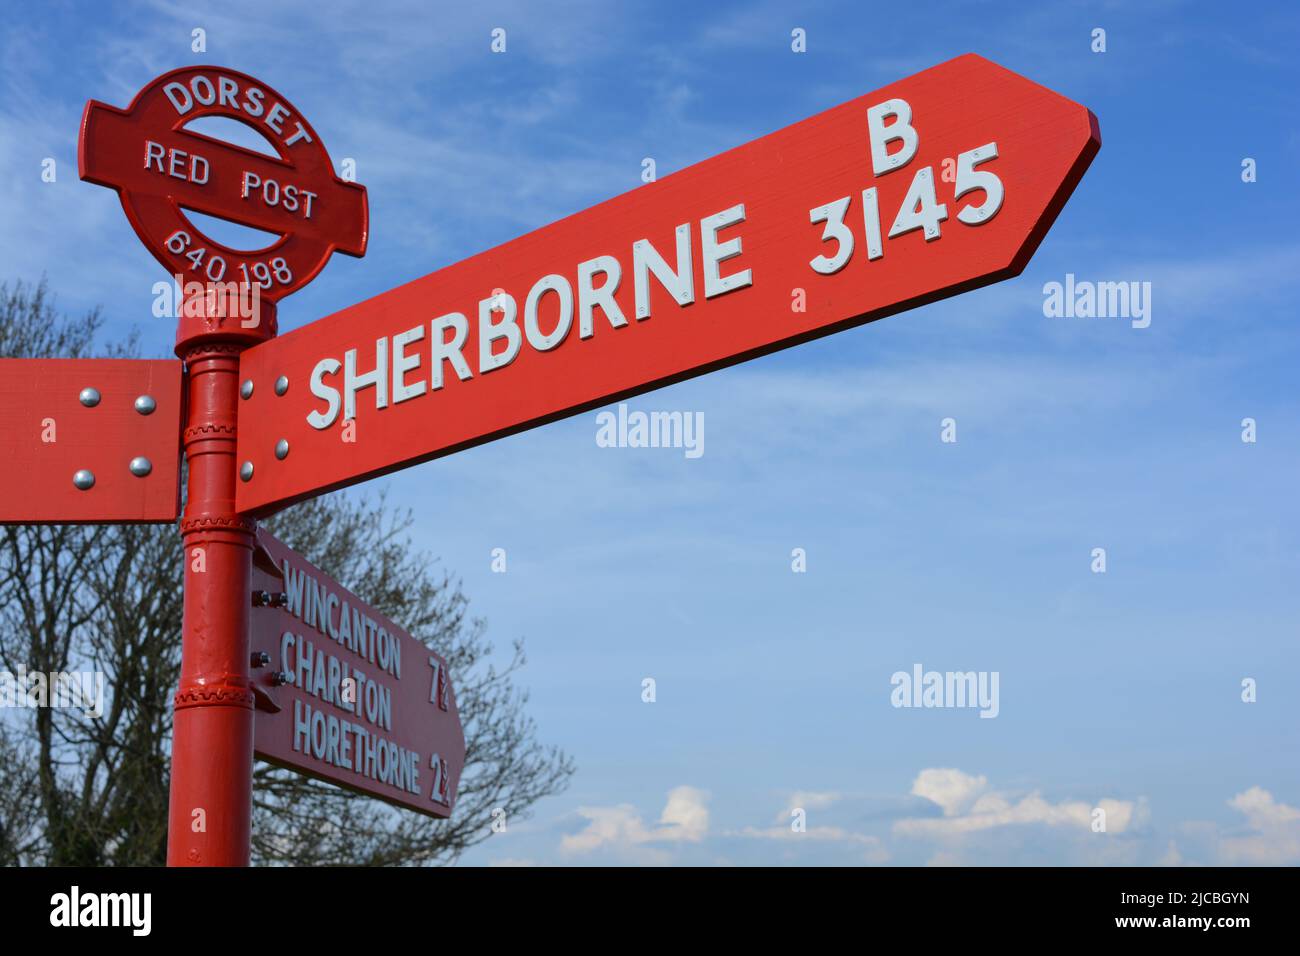 Traditional and distinctive Dorset Red Post, road sign pointing towards Sherborne on the B1345 road near Poyntington Stock Photo